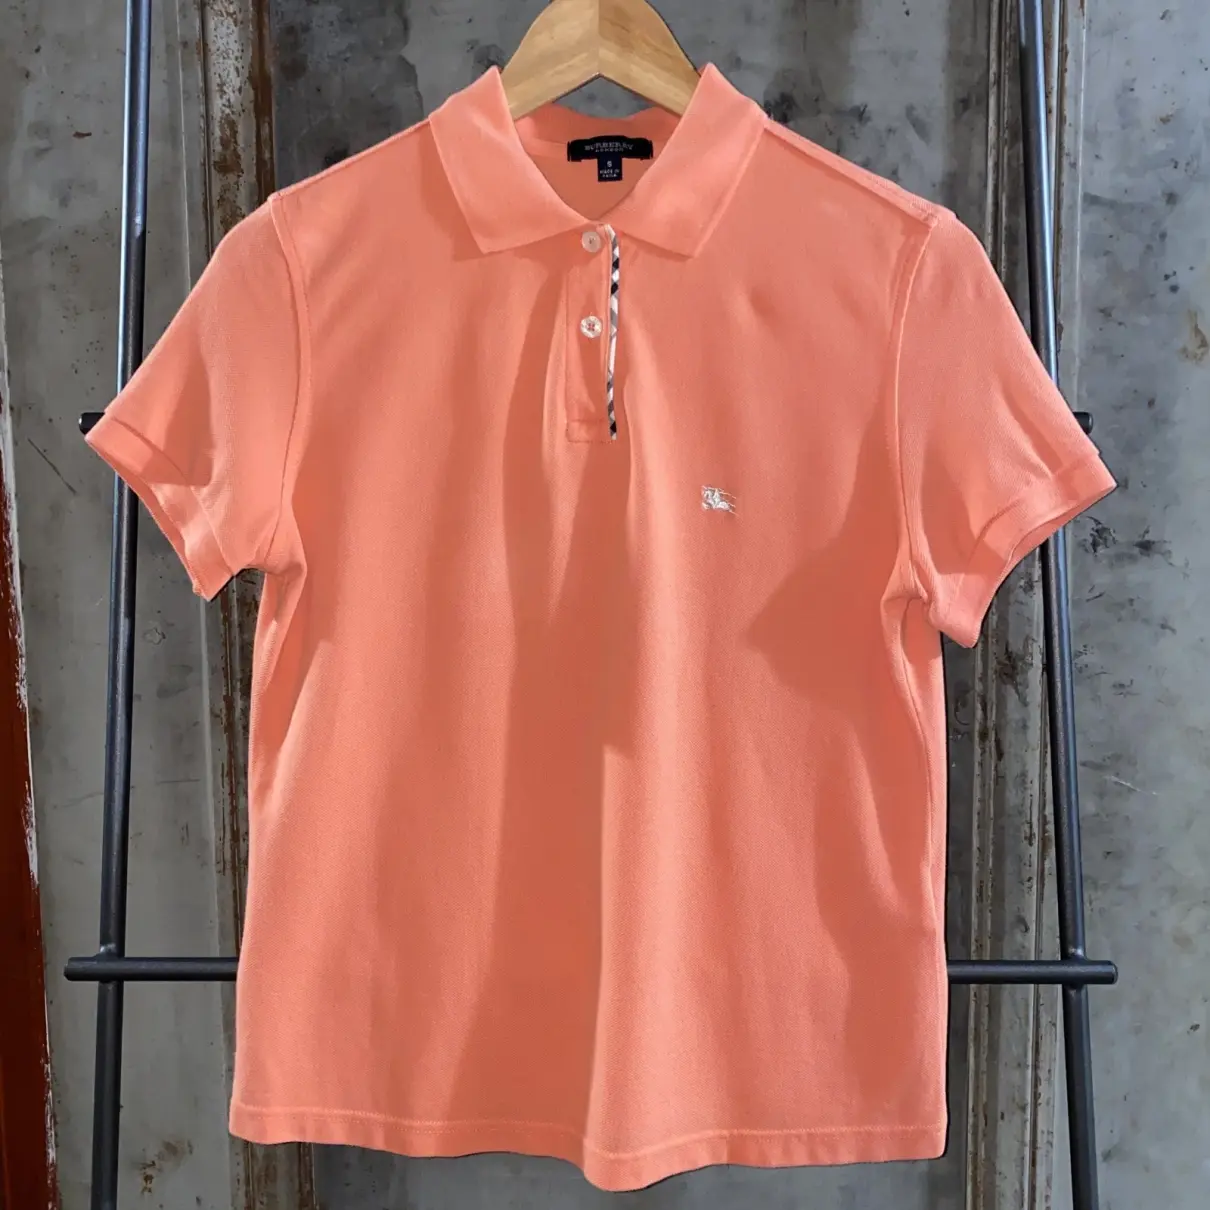 Buy Burberry Polo online